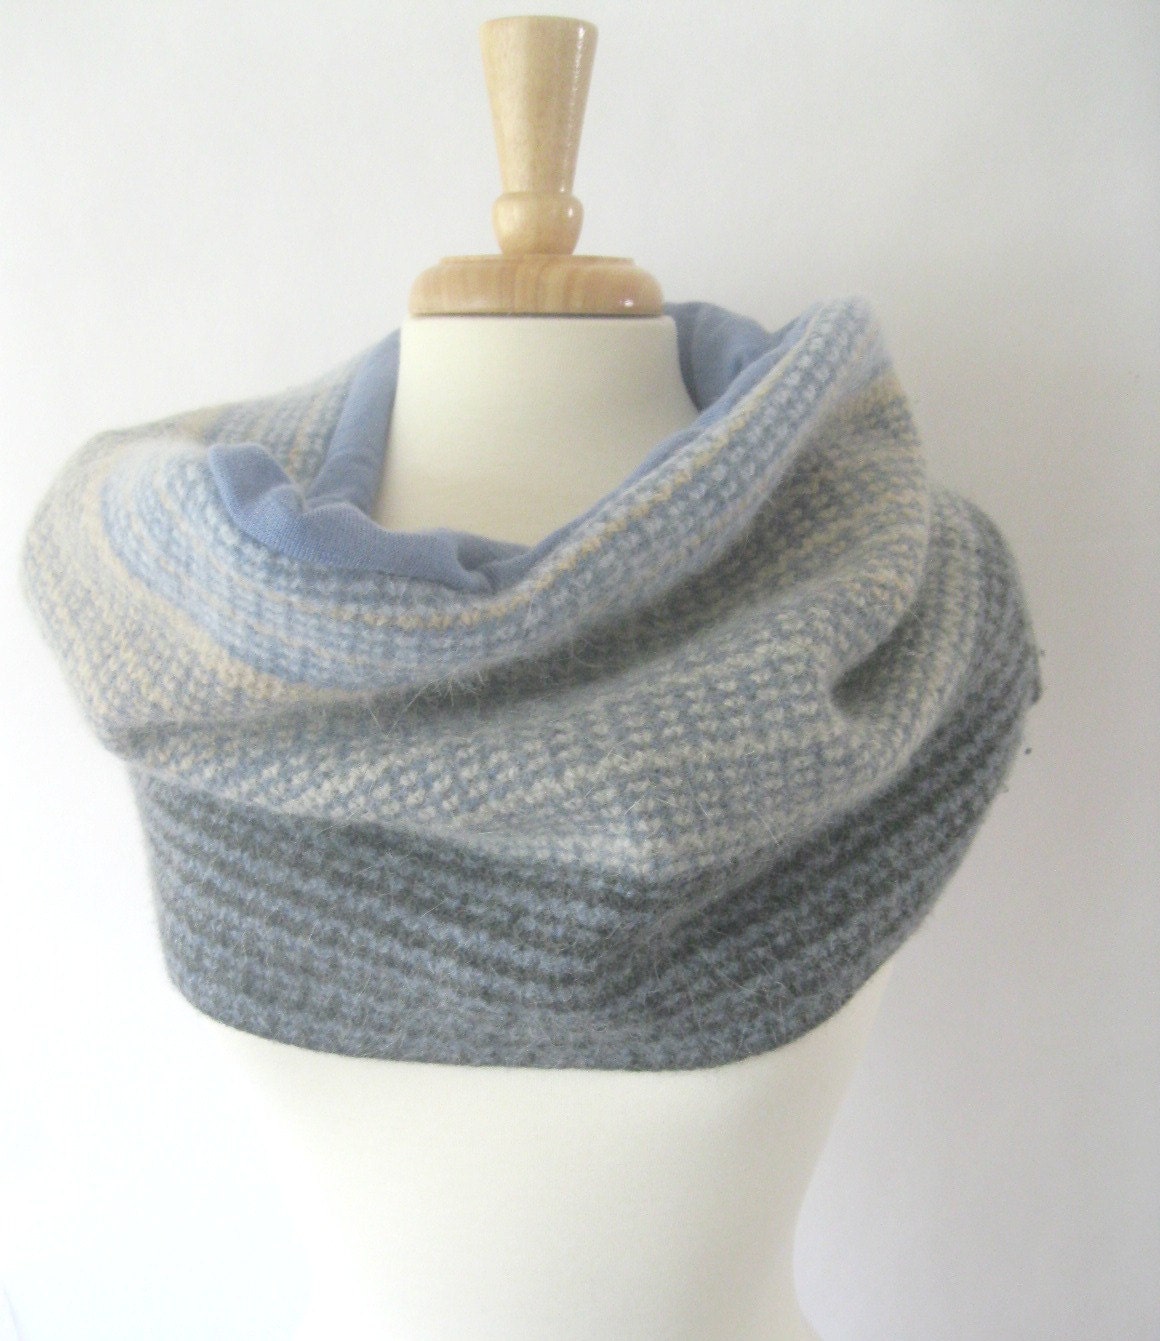 Wool Snood Infinity Scarf Reversible Cowl - Blue Cream and Gray Texture : Upcycled Recycled Repurposed Fall Fashion - SewEcological